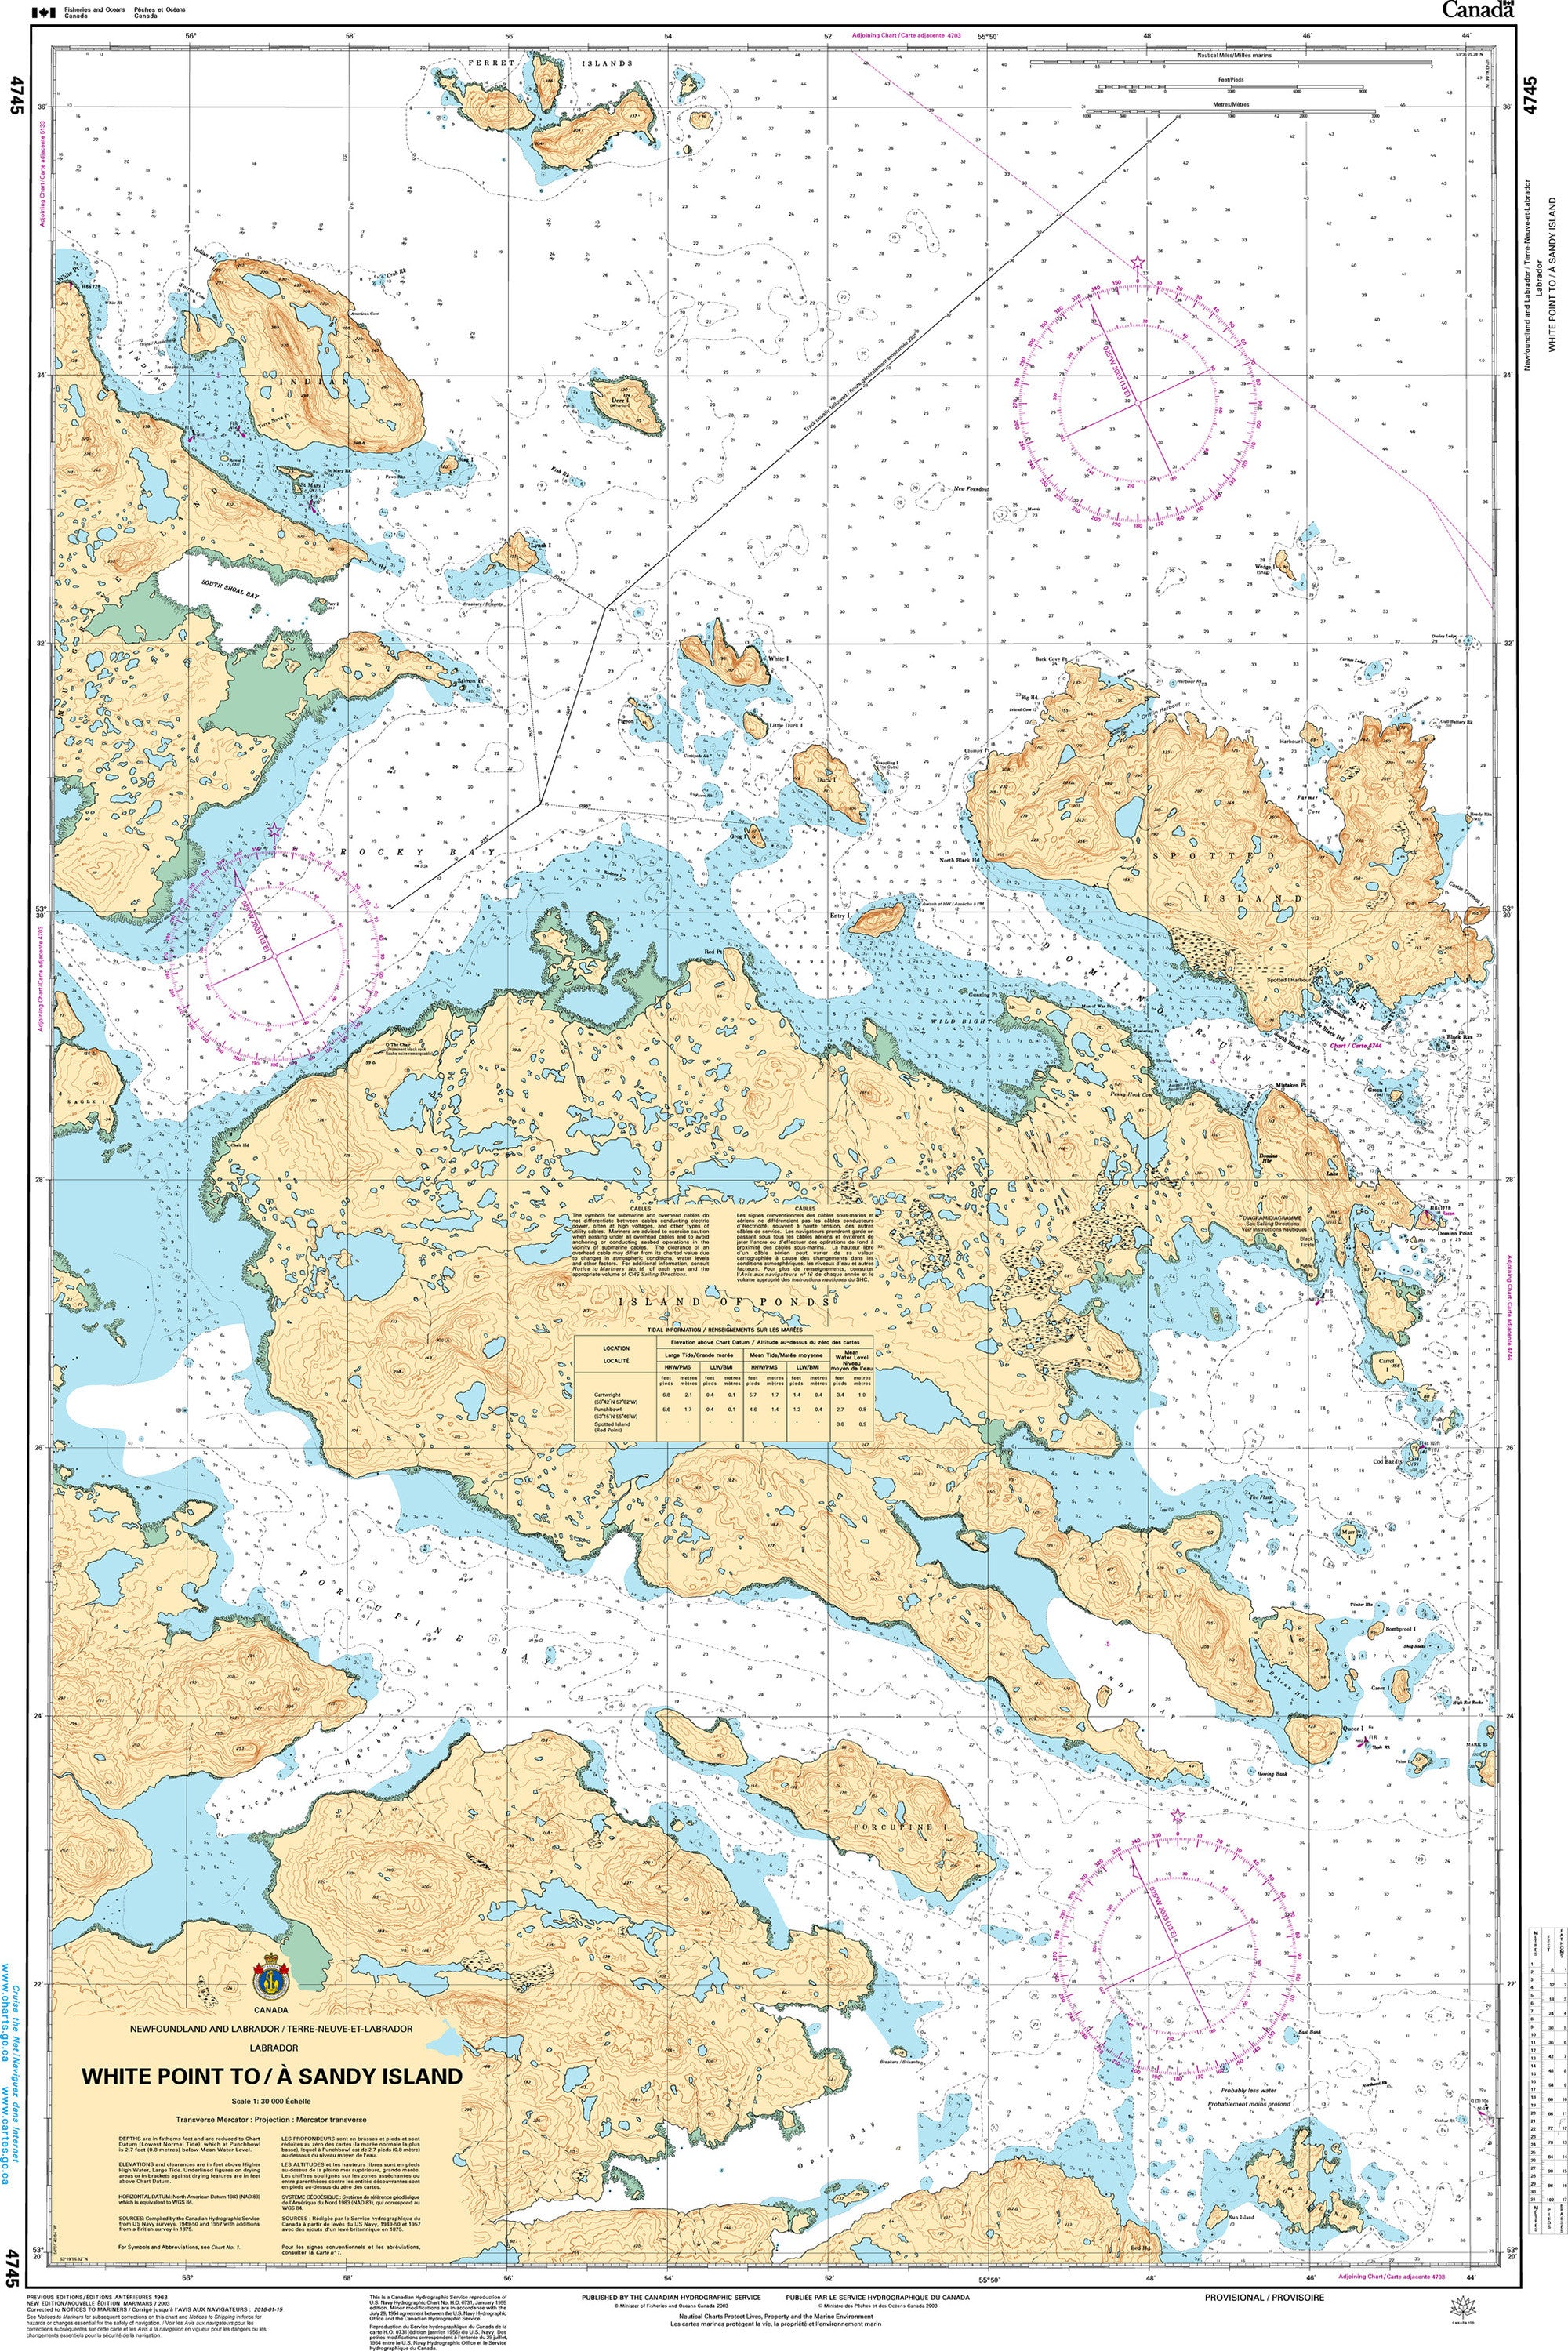 Canadian Hydrographic Service Nautical Chart CHS4745: White Point to/à Sandy Island